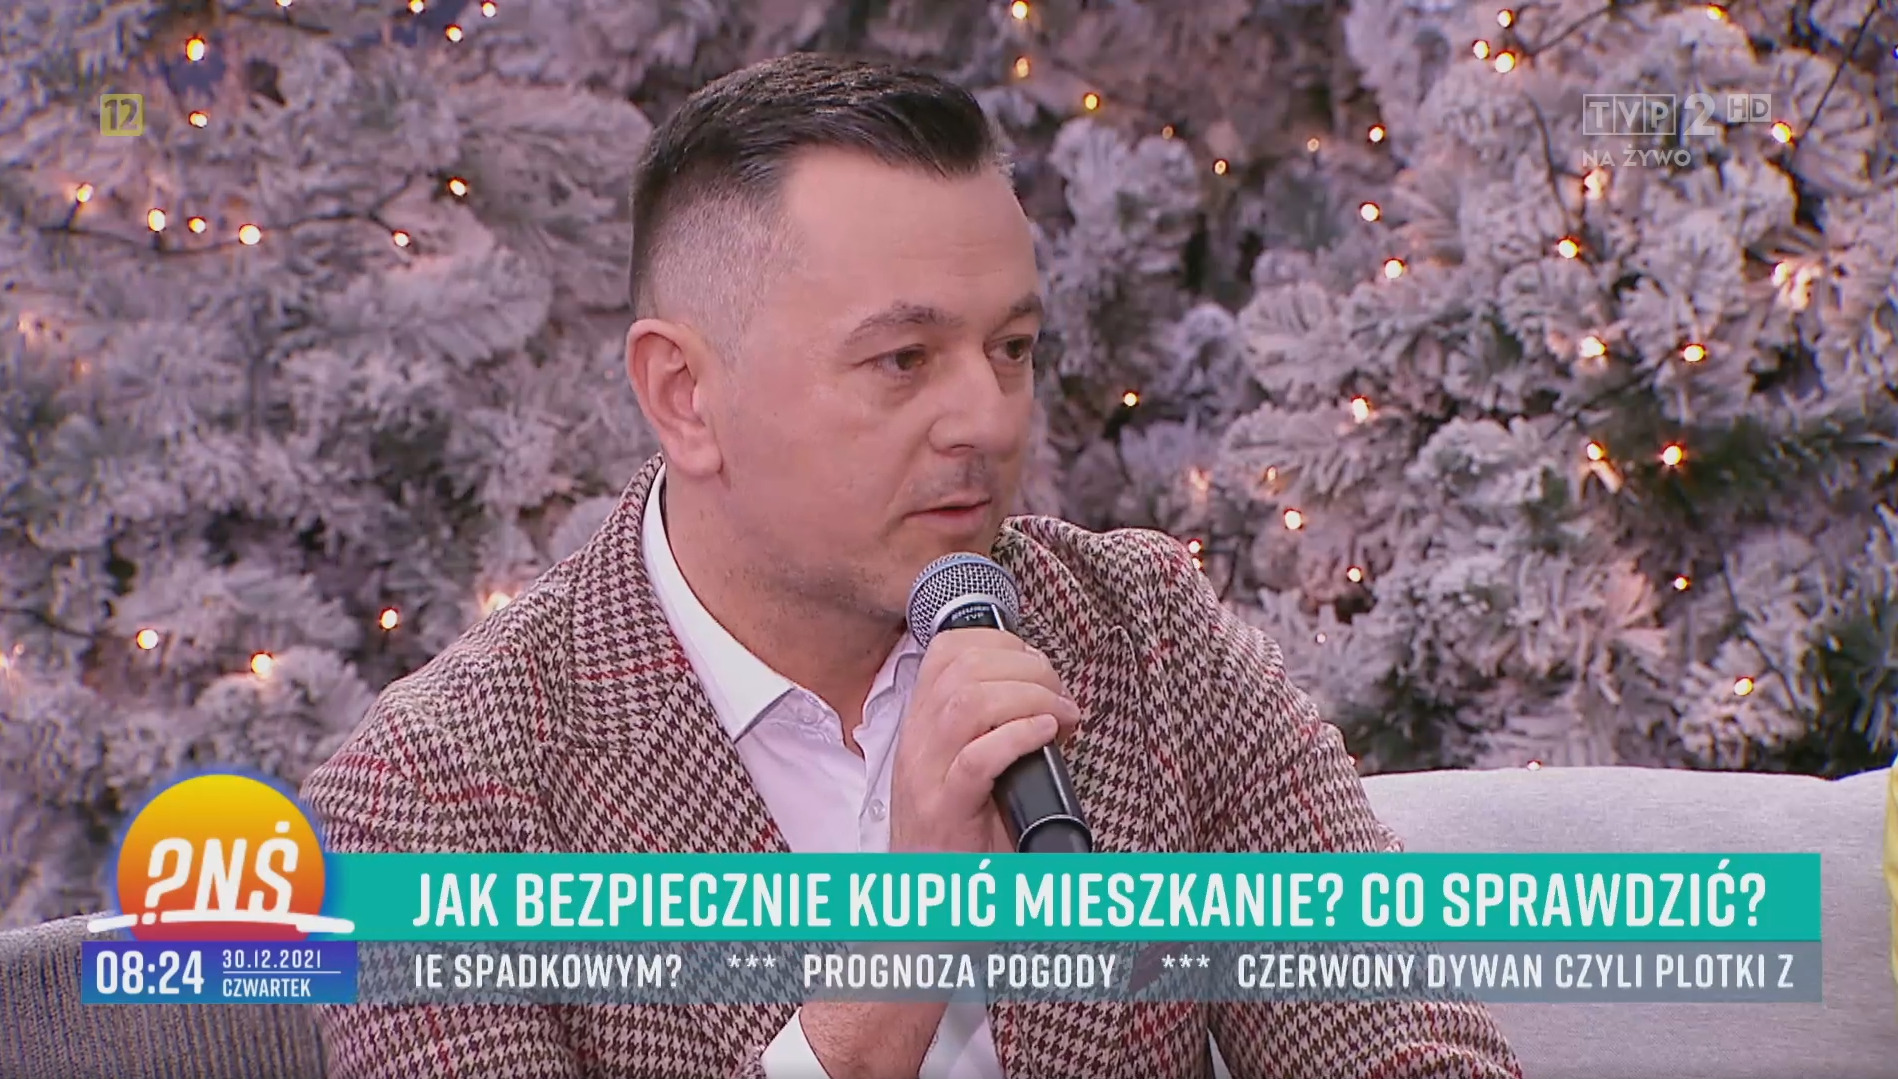 Closing of the year at Woronicza on TVP (Polish Television)